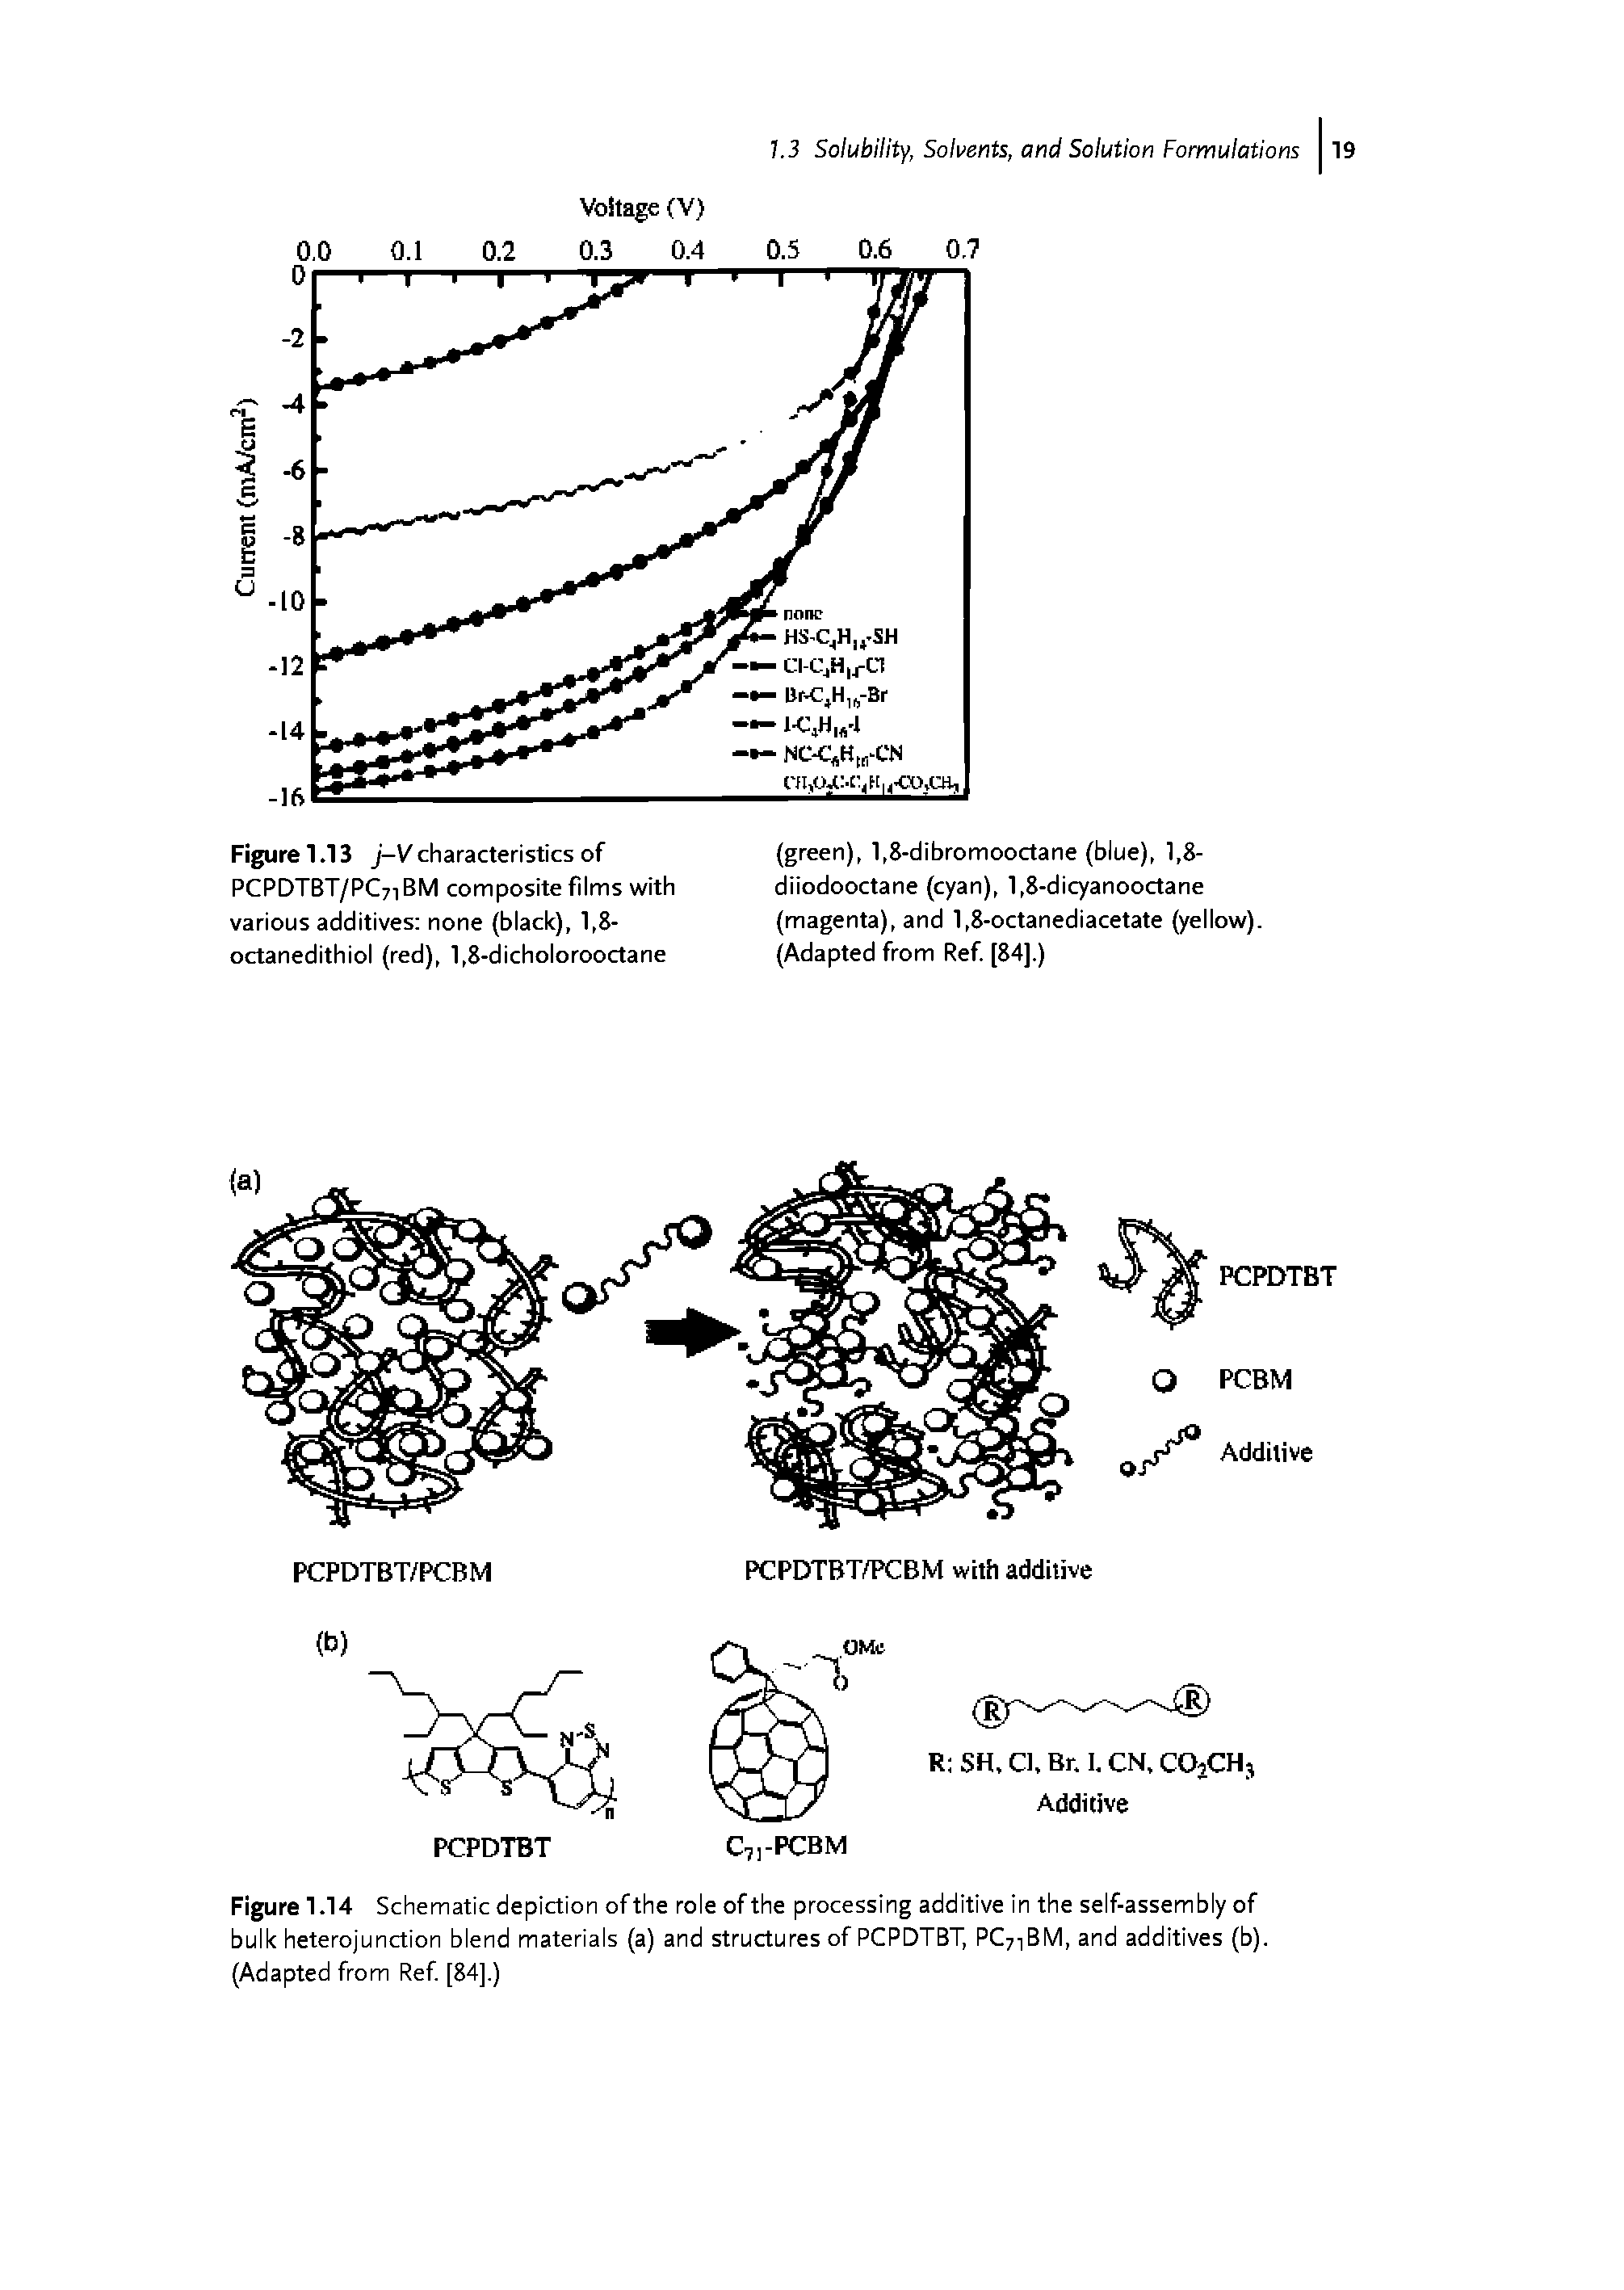 Figure 1.14 Schematic depiction of the role of the processing additive in the self-assembly of bulk heterojunction blend materials (a) and structures of PCPDTBT, PC7iBM, and additives (b). (Adapted from Ref [84].)...